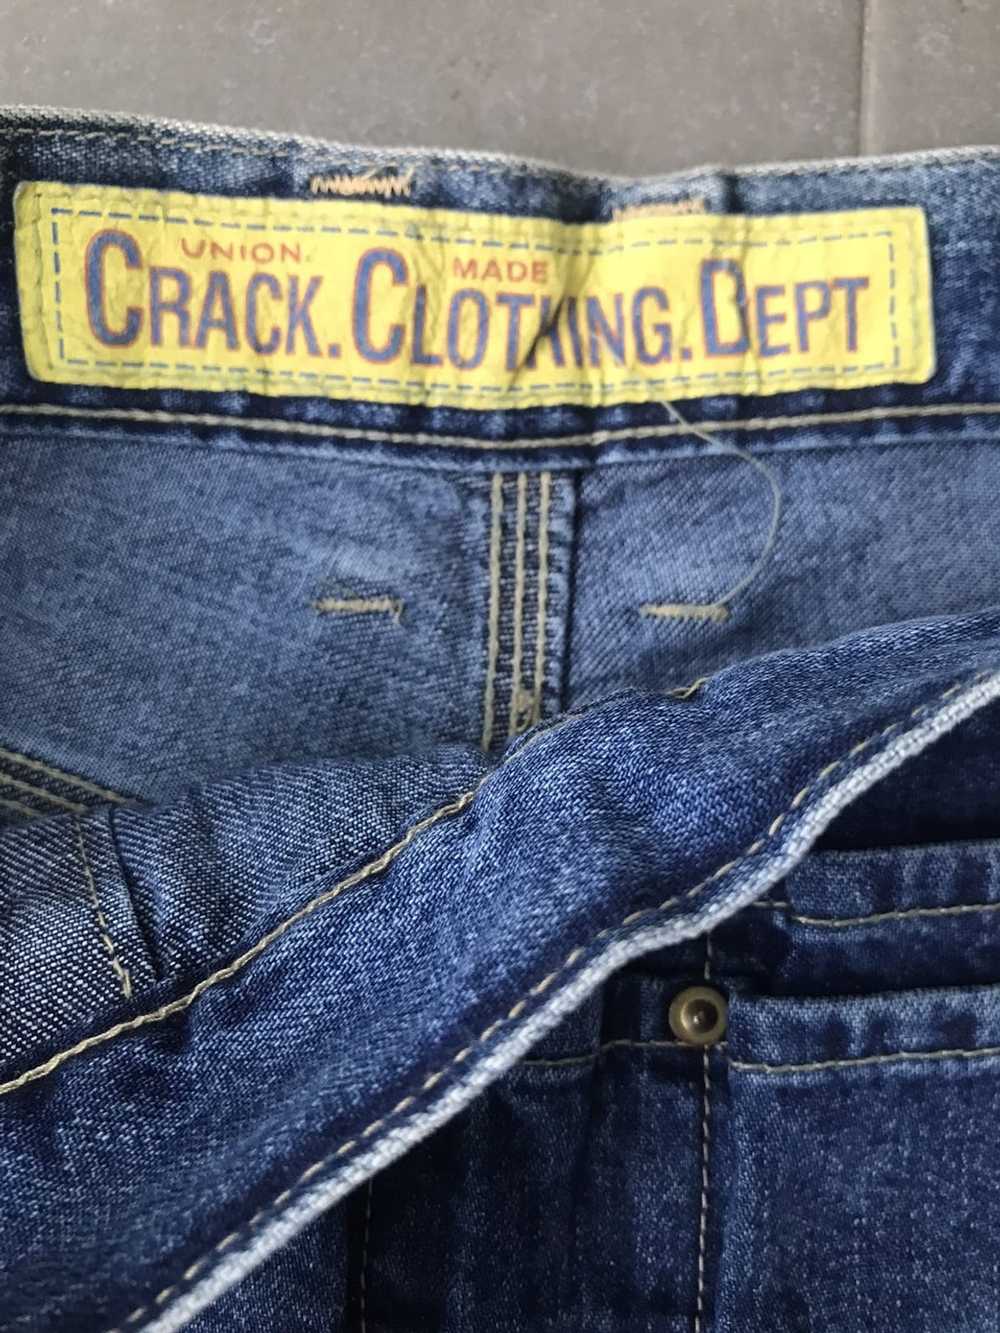 Japanese Brand × Workers Crack Clothing Dept Unio… - image 6